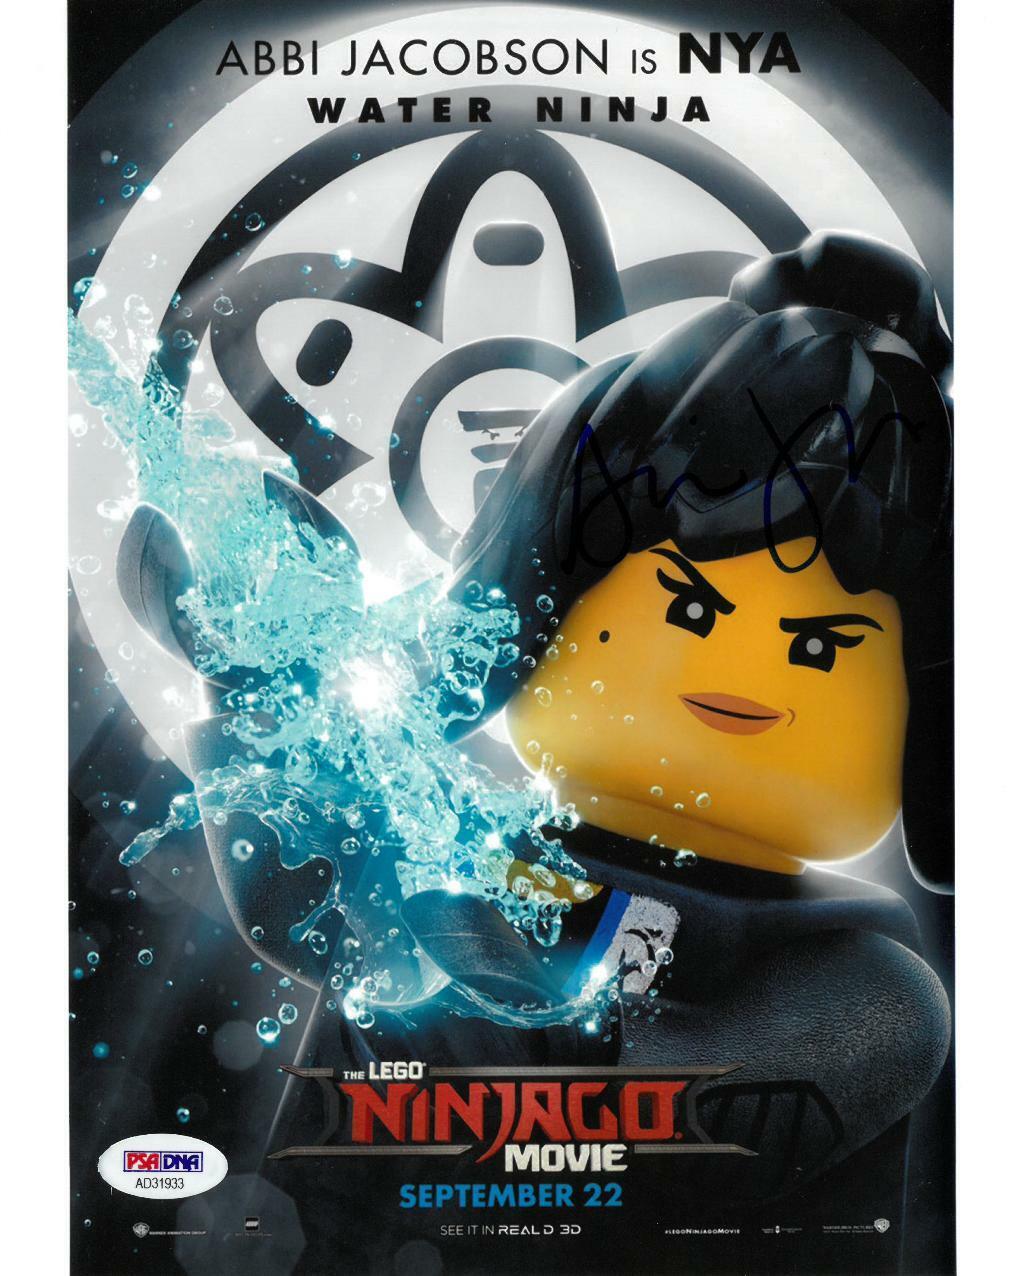 Abbi Jacobson Signed Lego Ninjago Autographed 8x10 Photo Poster painting PSA/DNA #AD31933